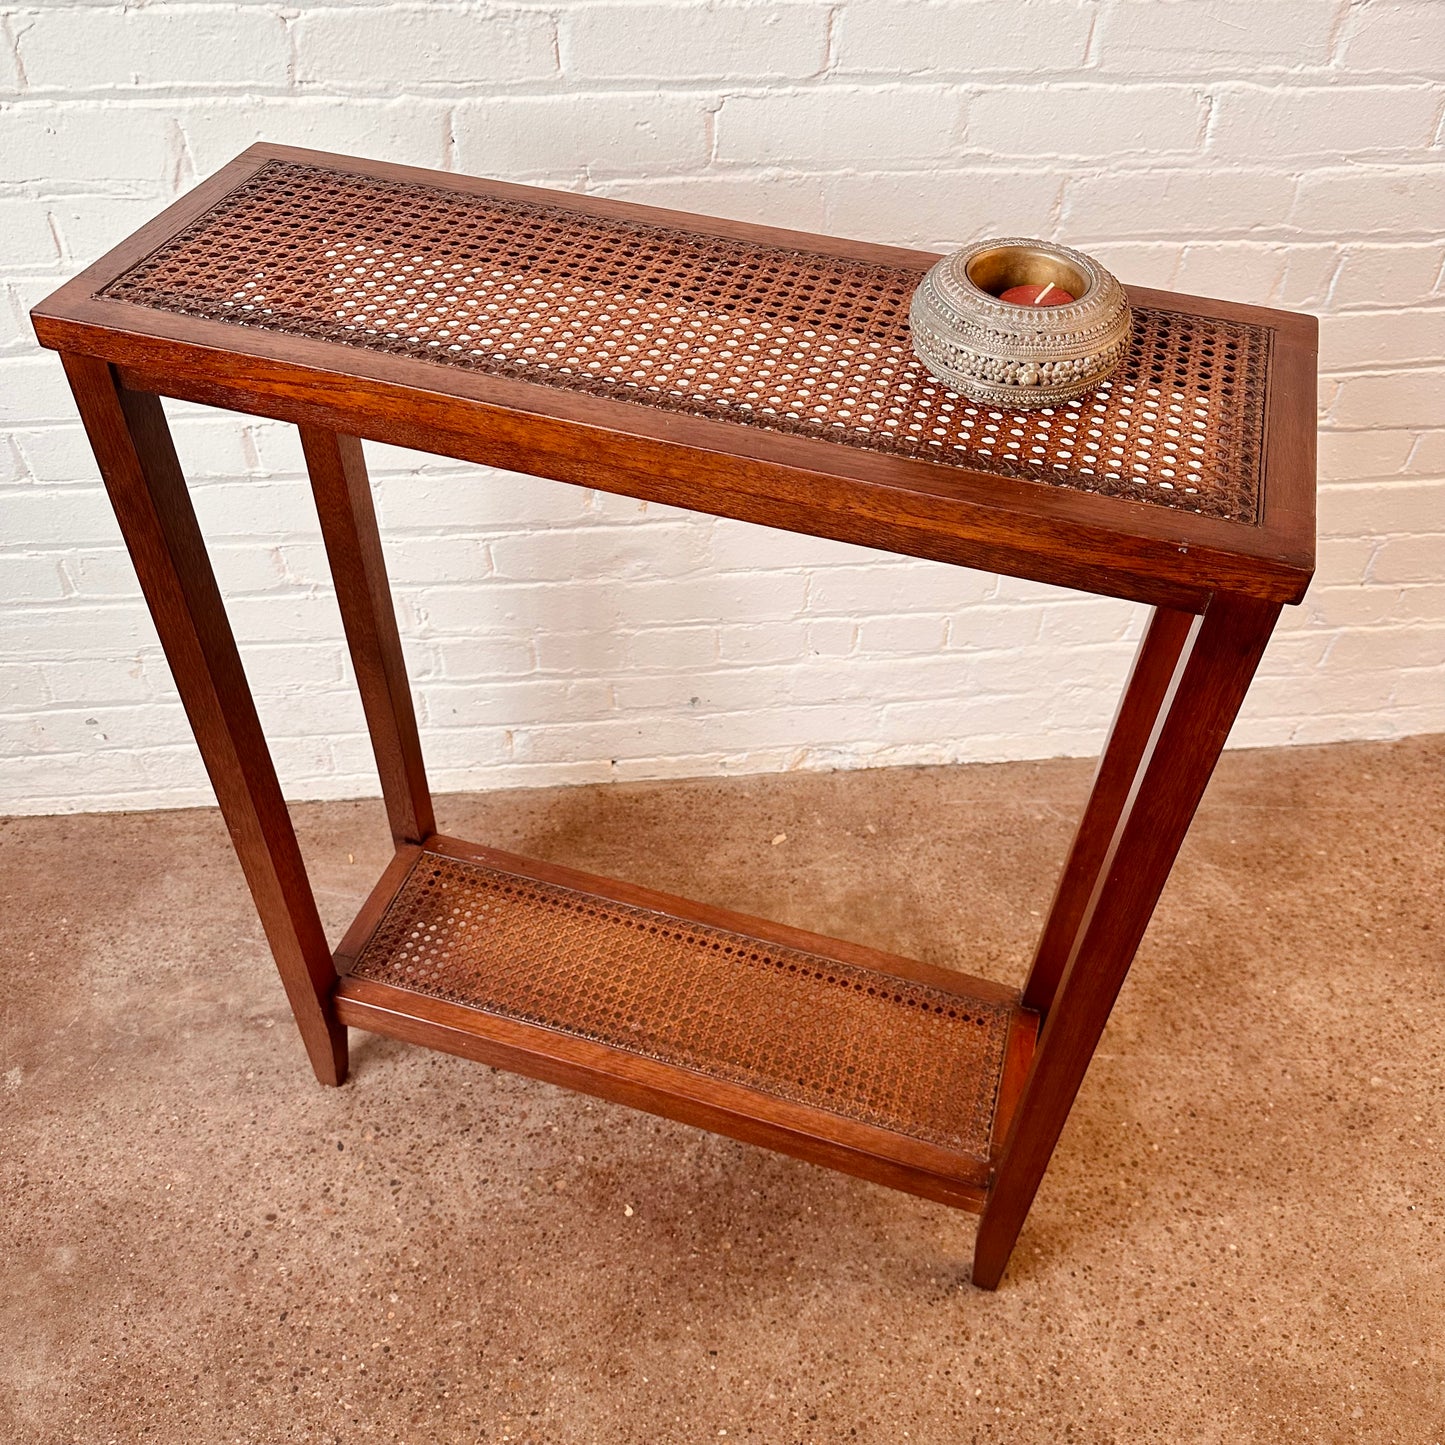 TWO TIER CONSOLE TABLE WITH CANNING